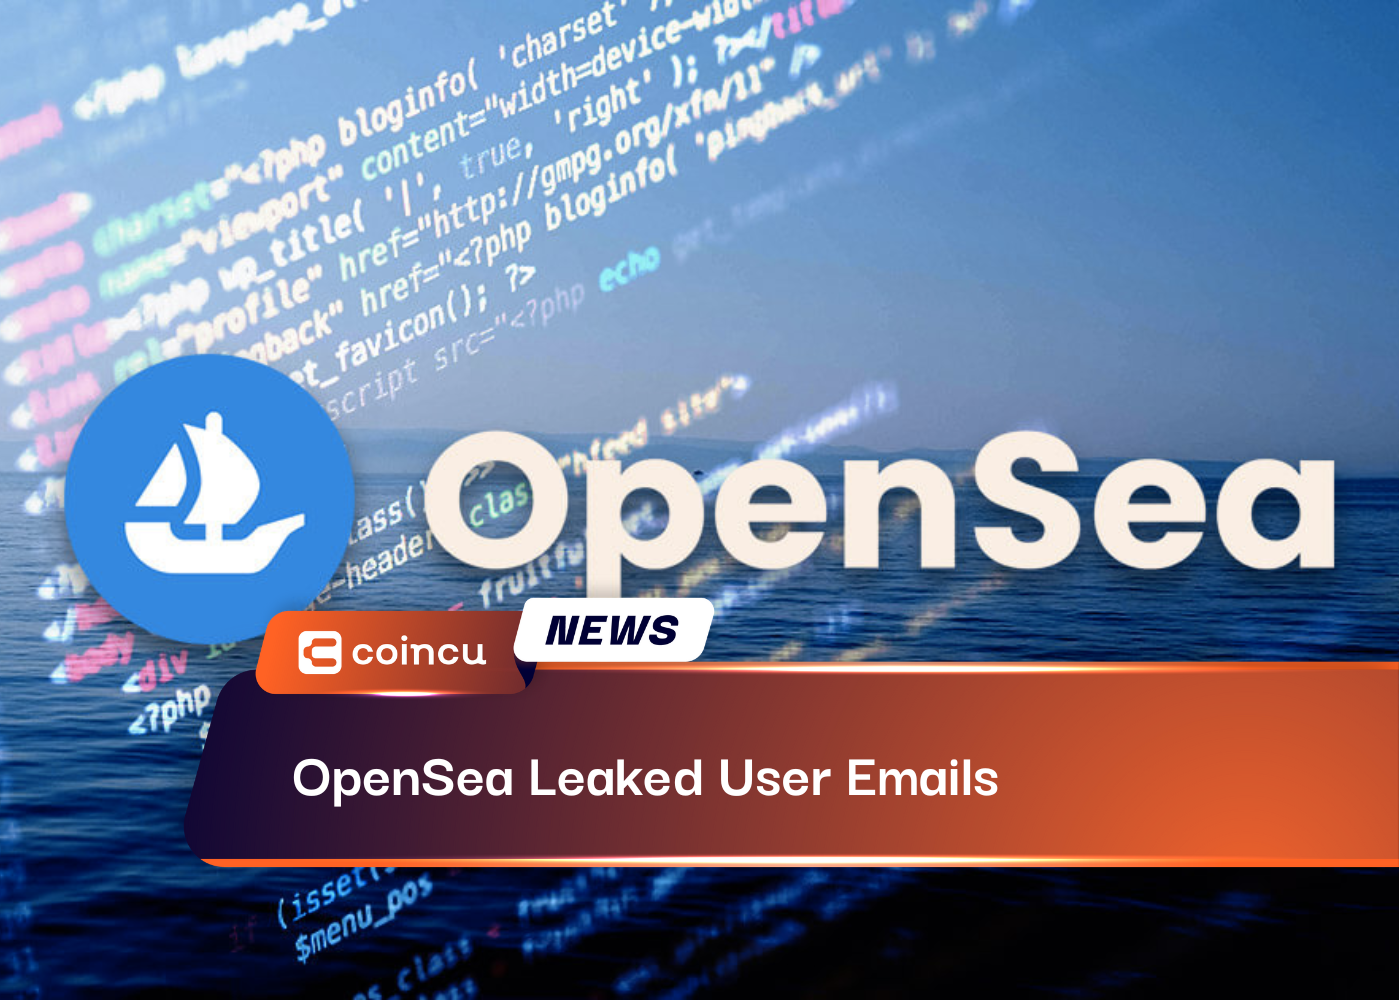 OpenSea Leaked User Emails